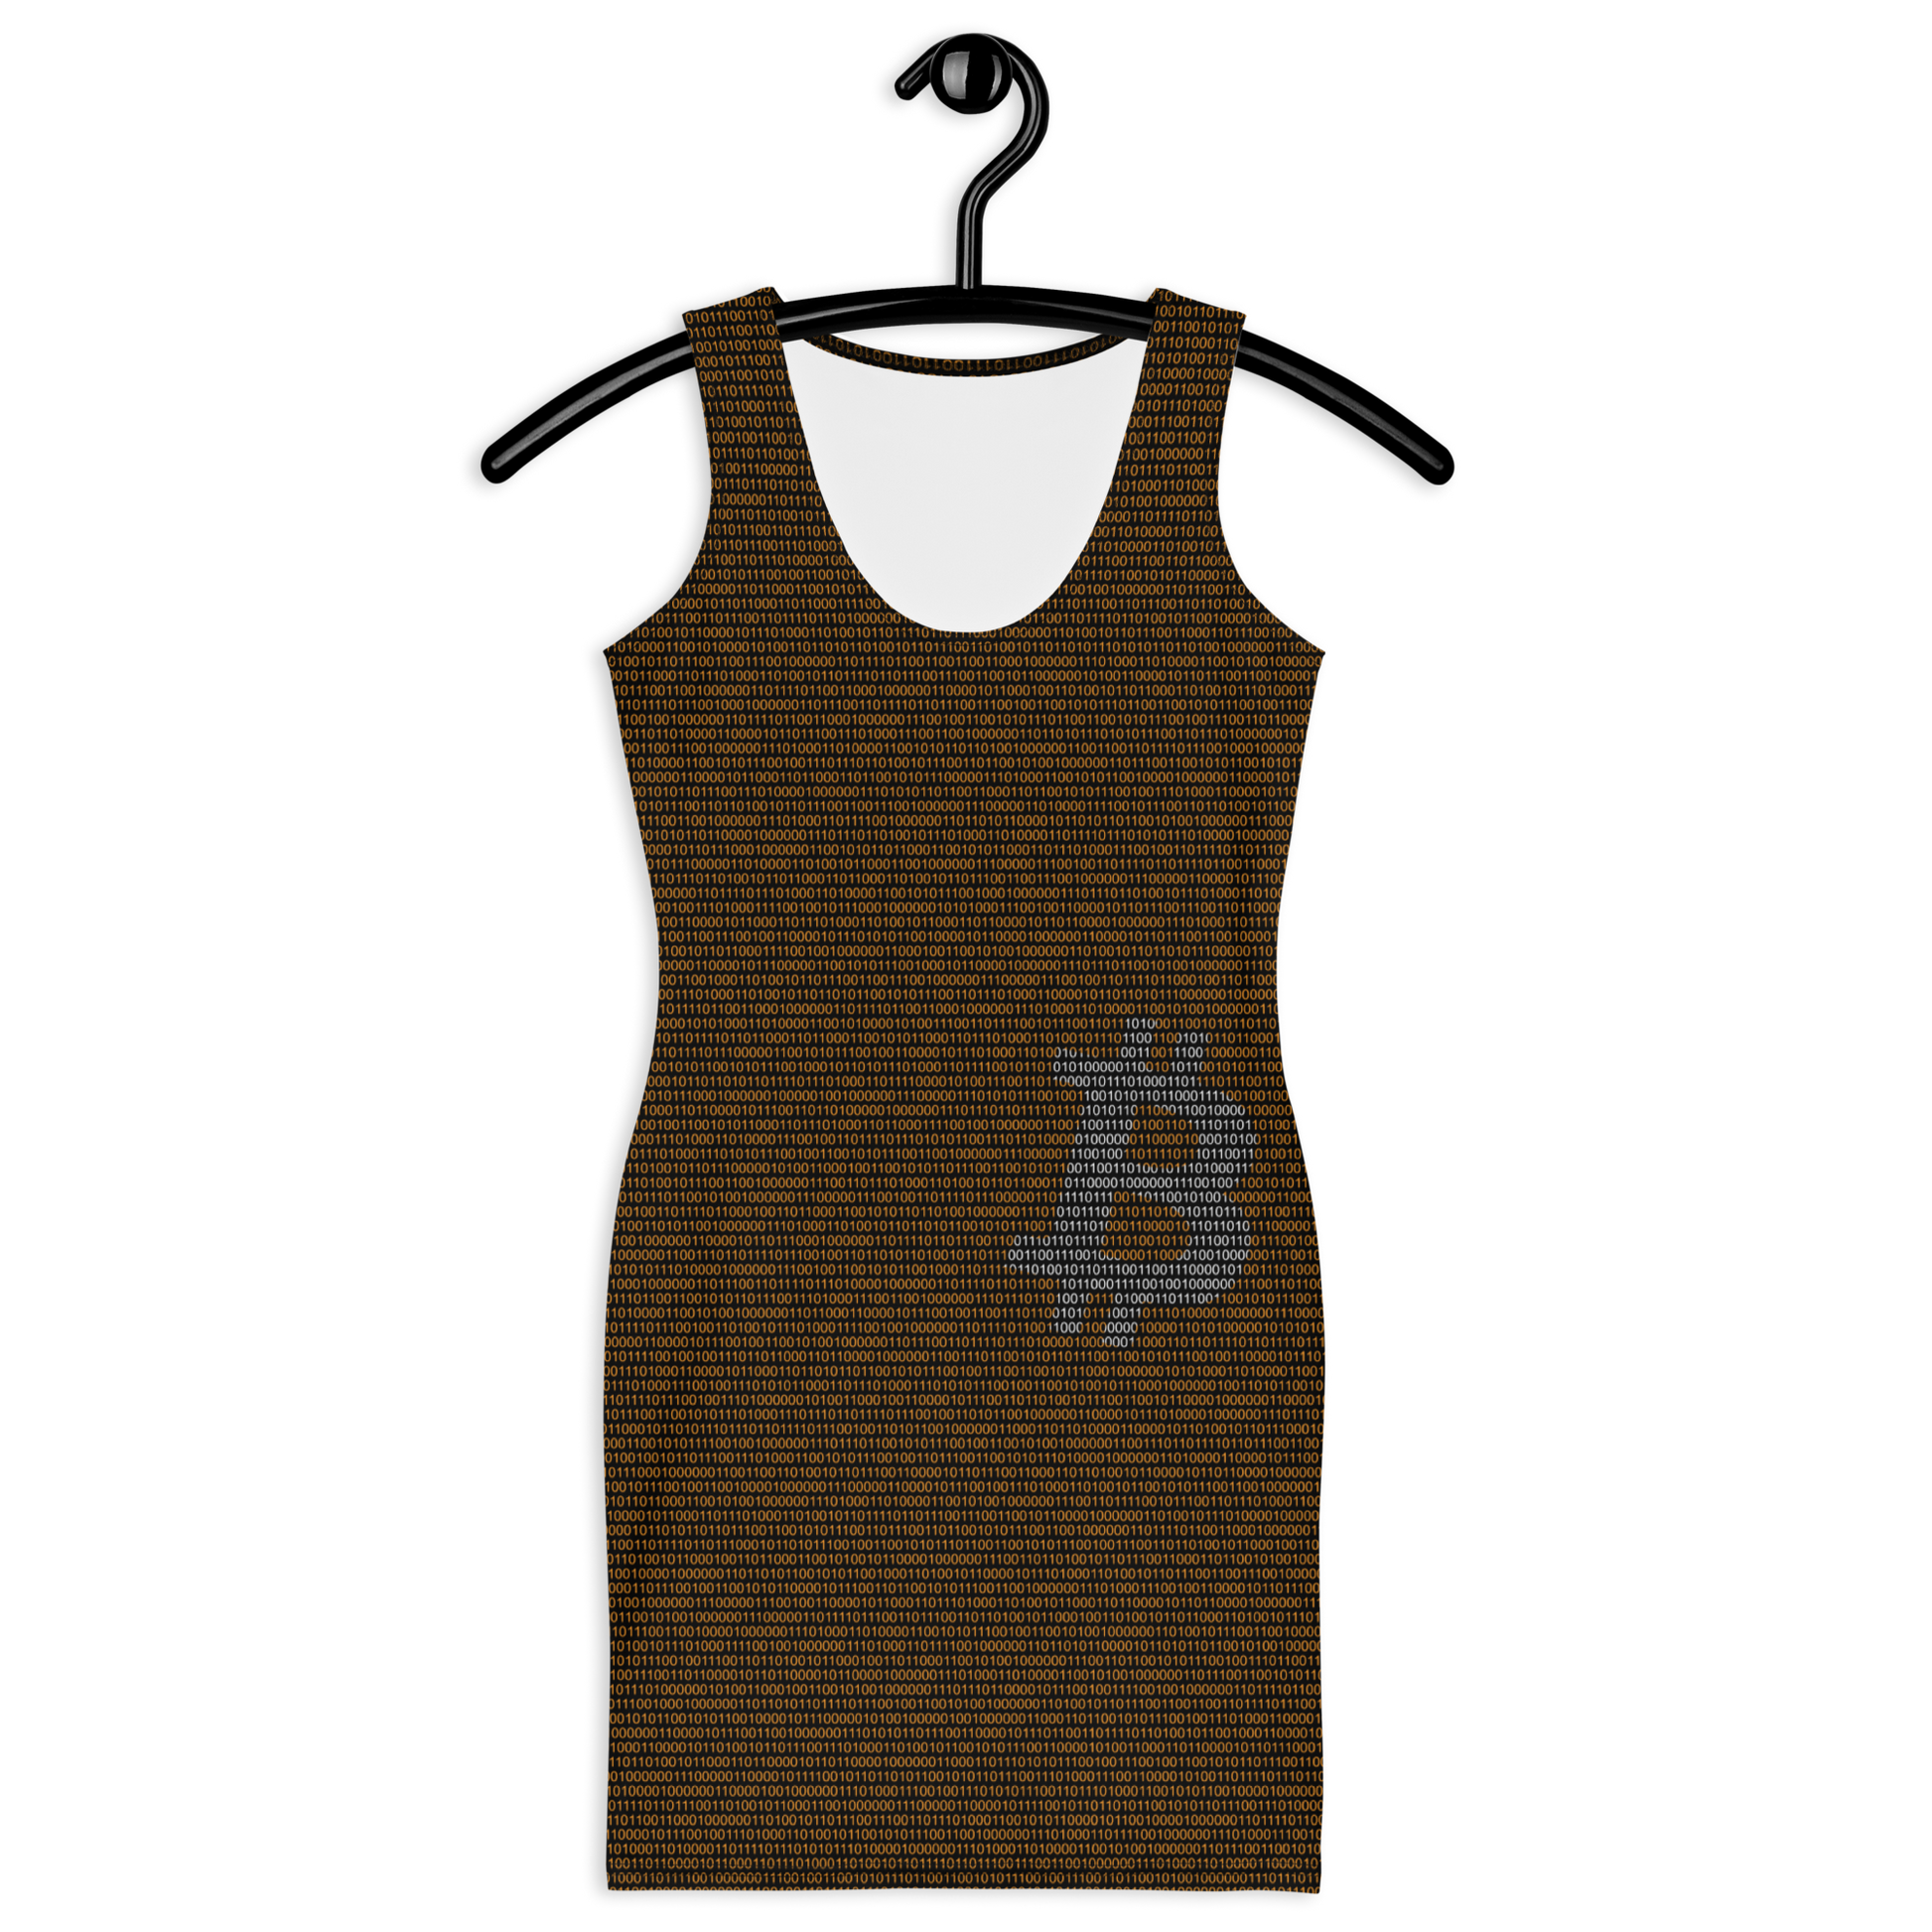 Front view of a black bitcoin bodycon dress.